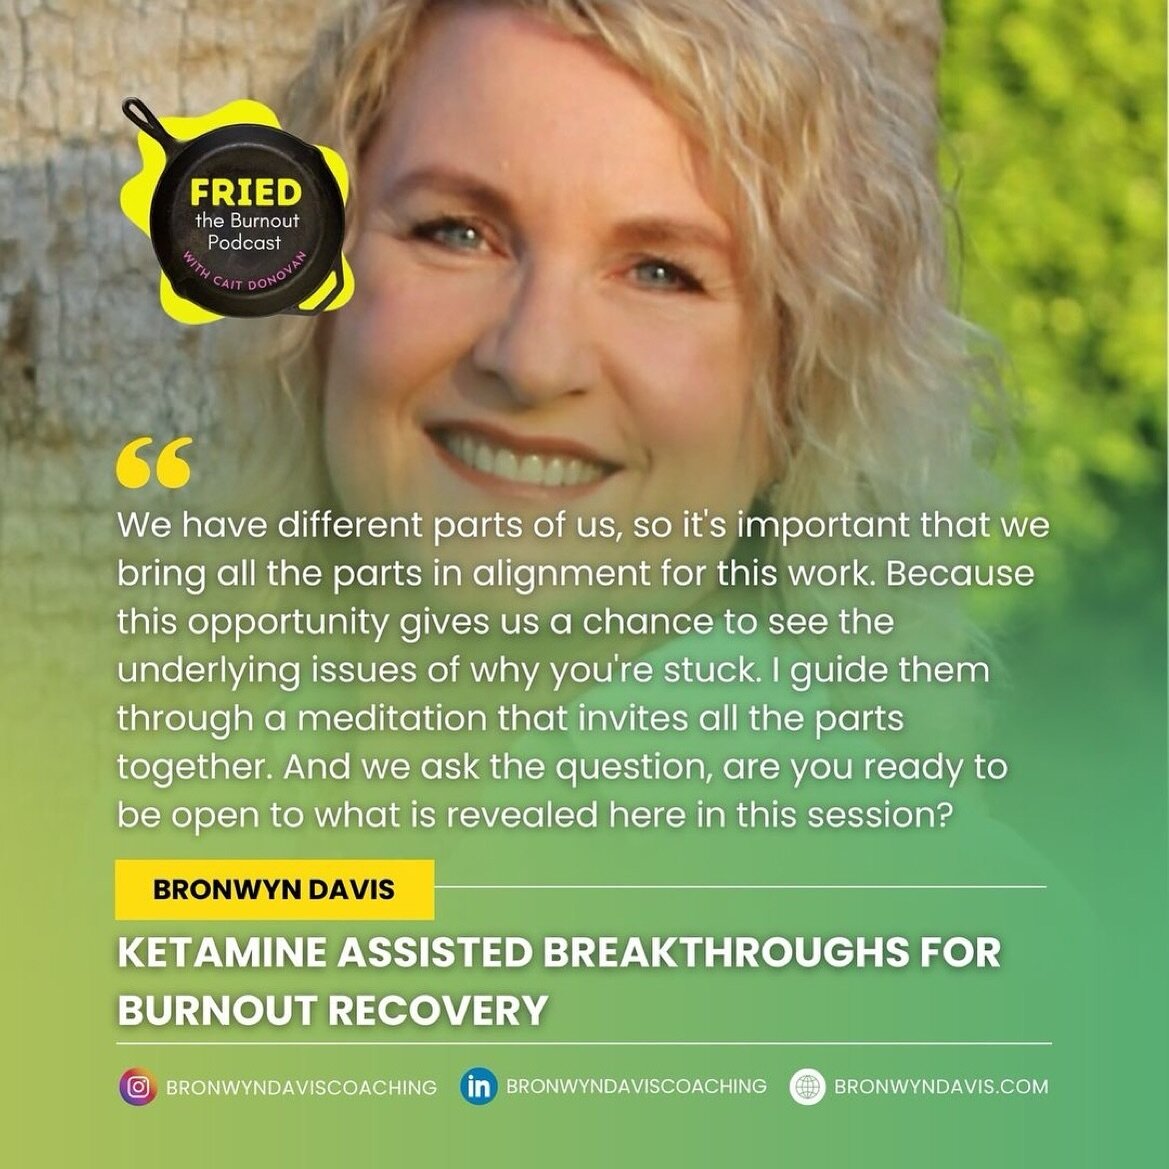 What an honor it is for me to be a guest on FRIED: The Burnout Podcast @friedtheburnoutpodcast

Check out the full episode to learn more about this powerful healing medicine.

Thank you @caitdonovanspeaks for giving me this opportunity to be a valuab